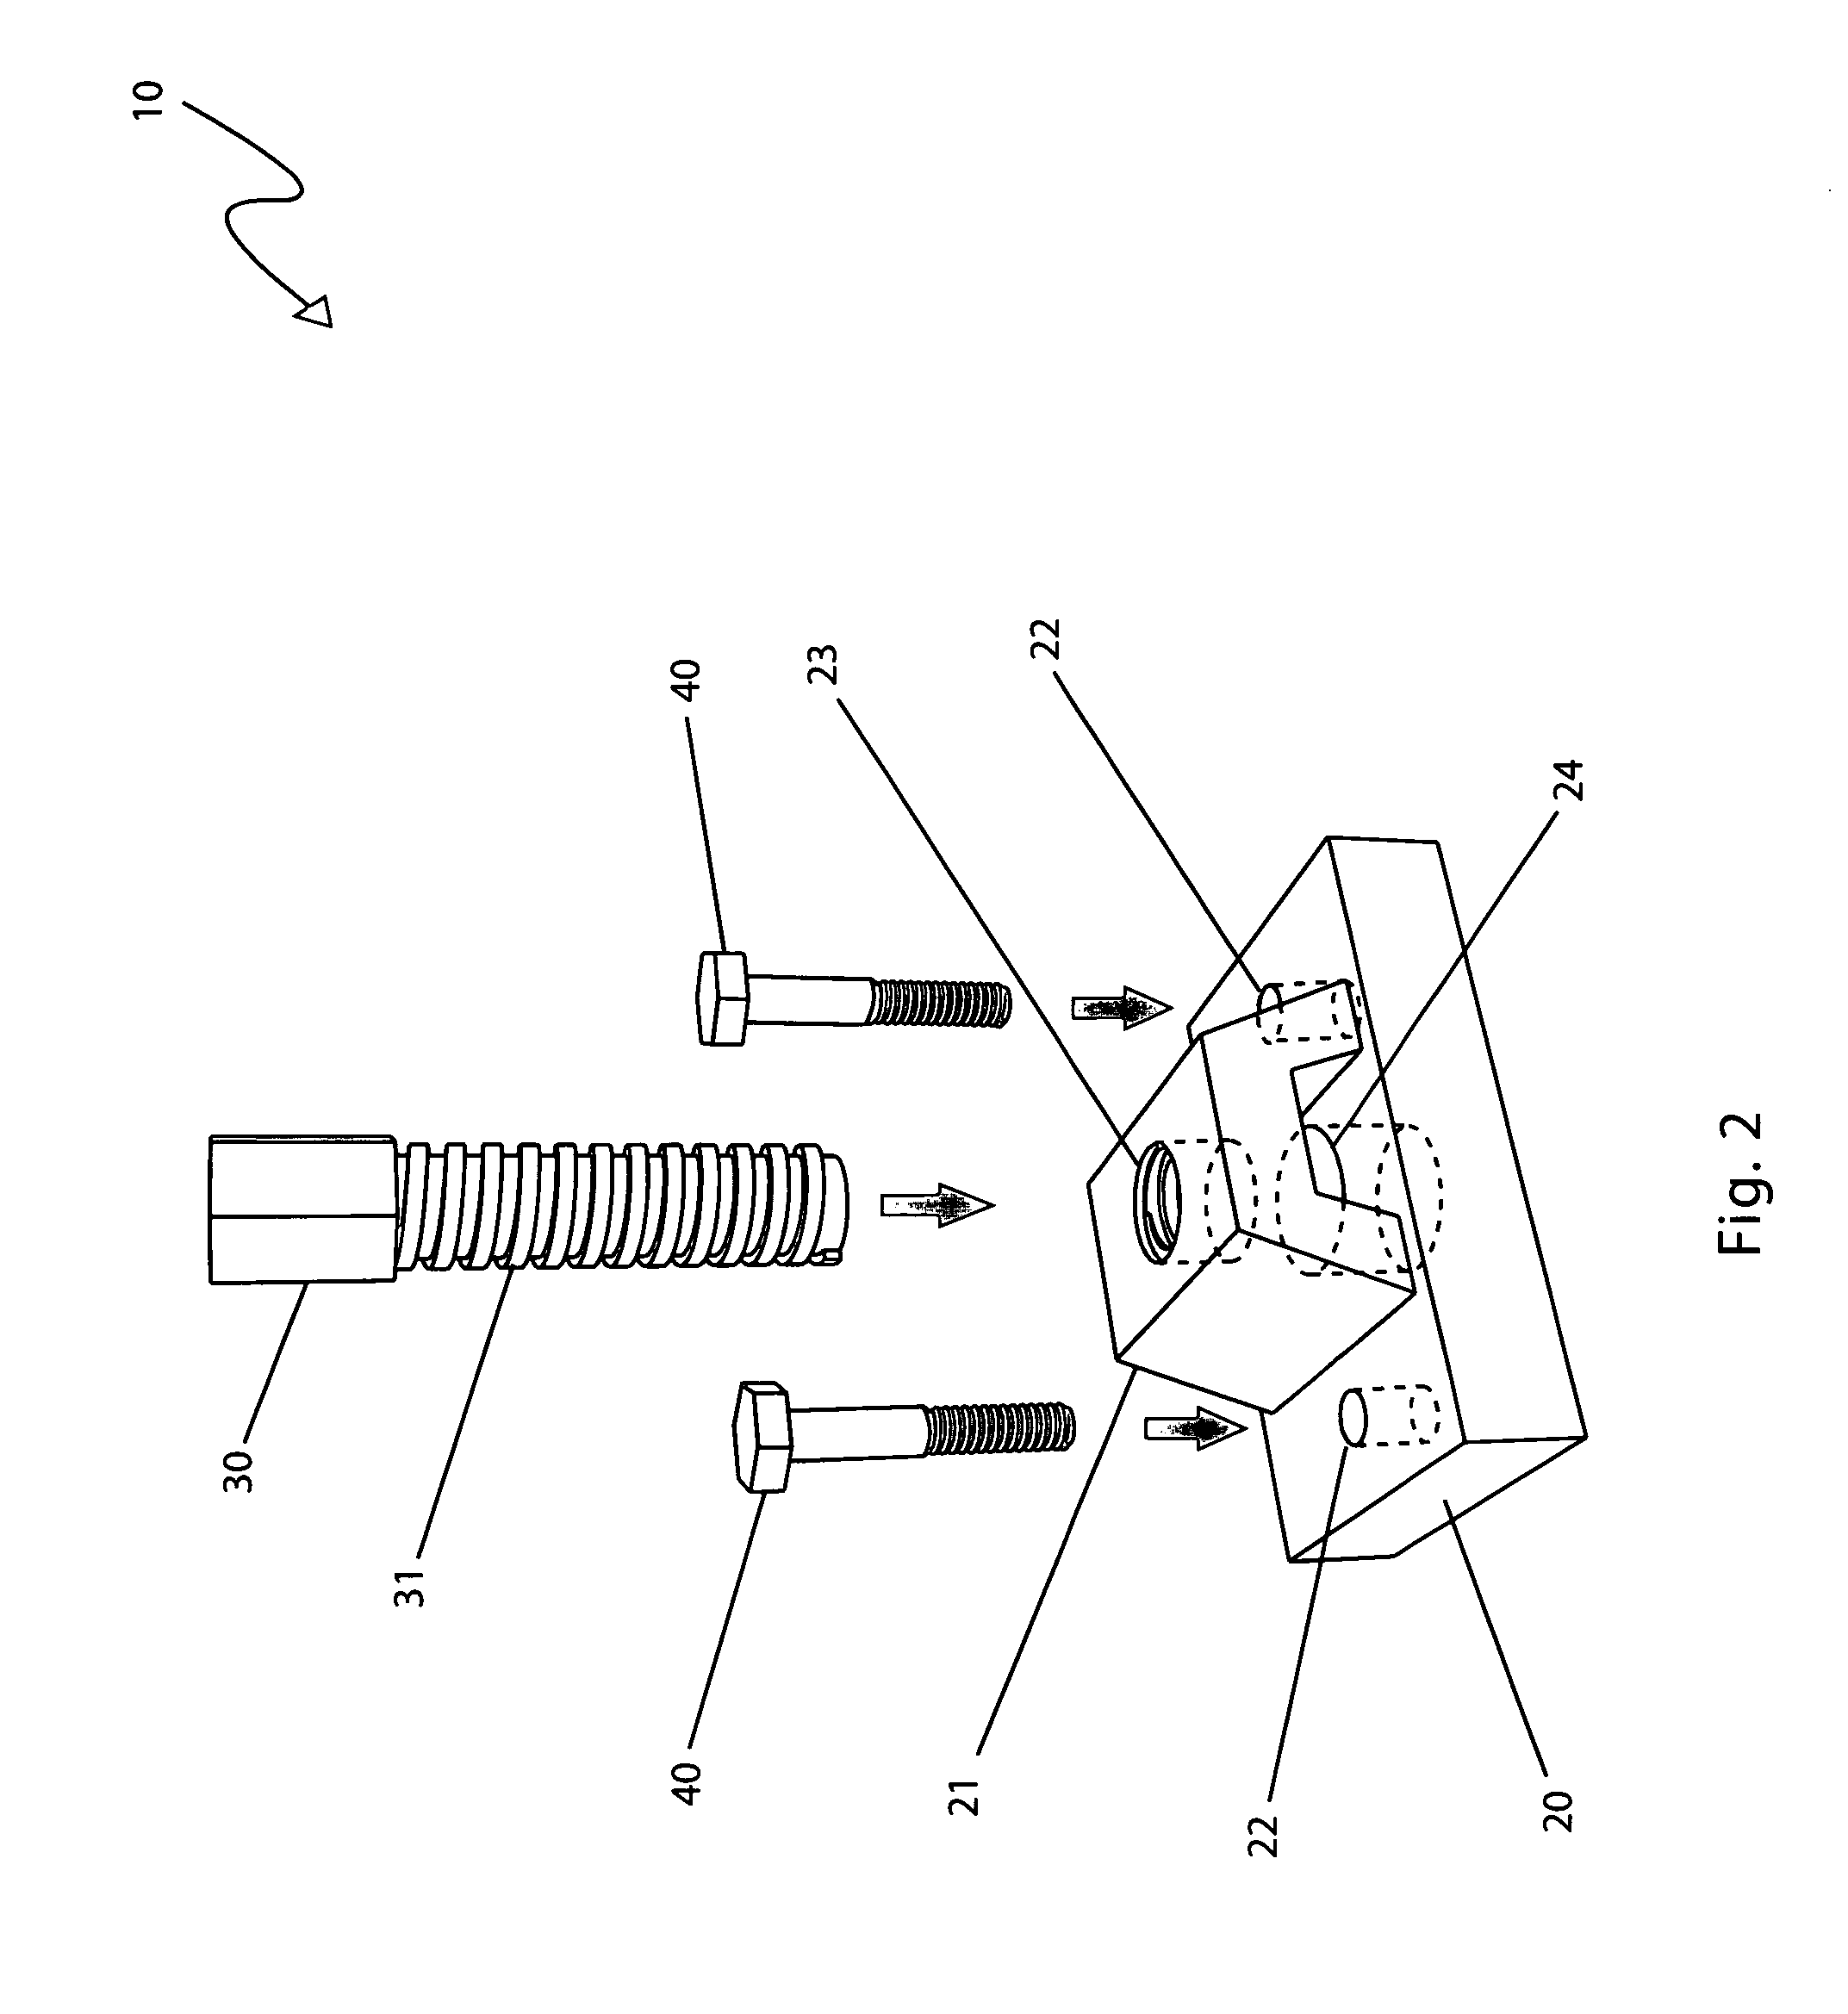 U-joint extracting tool and method of use therefor